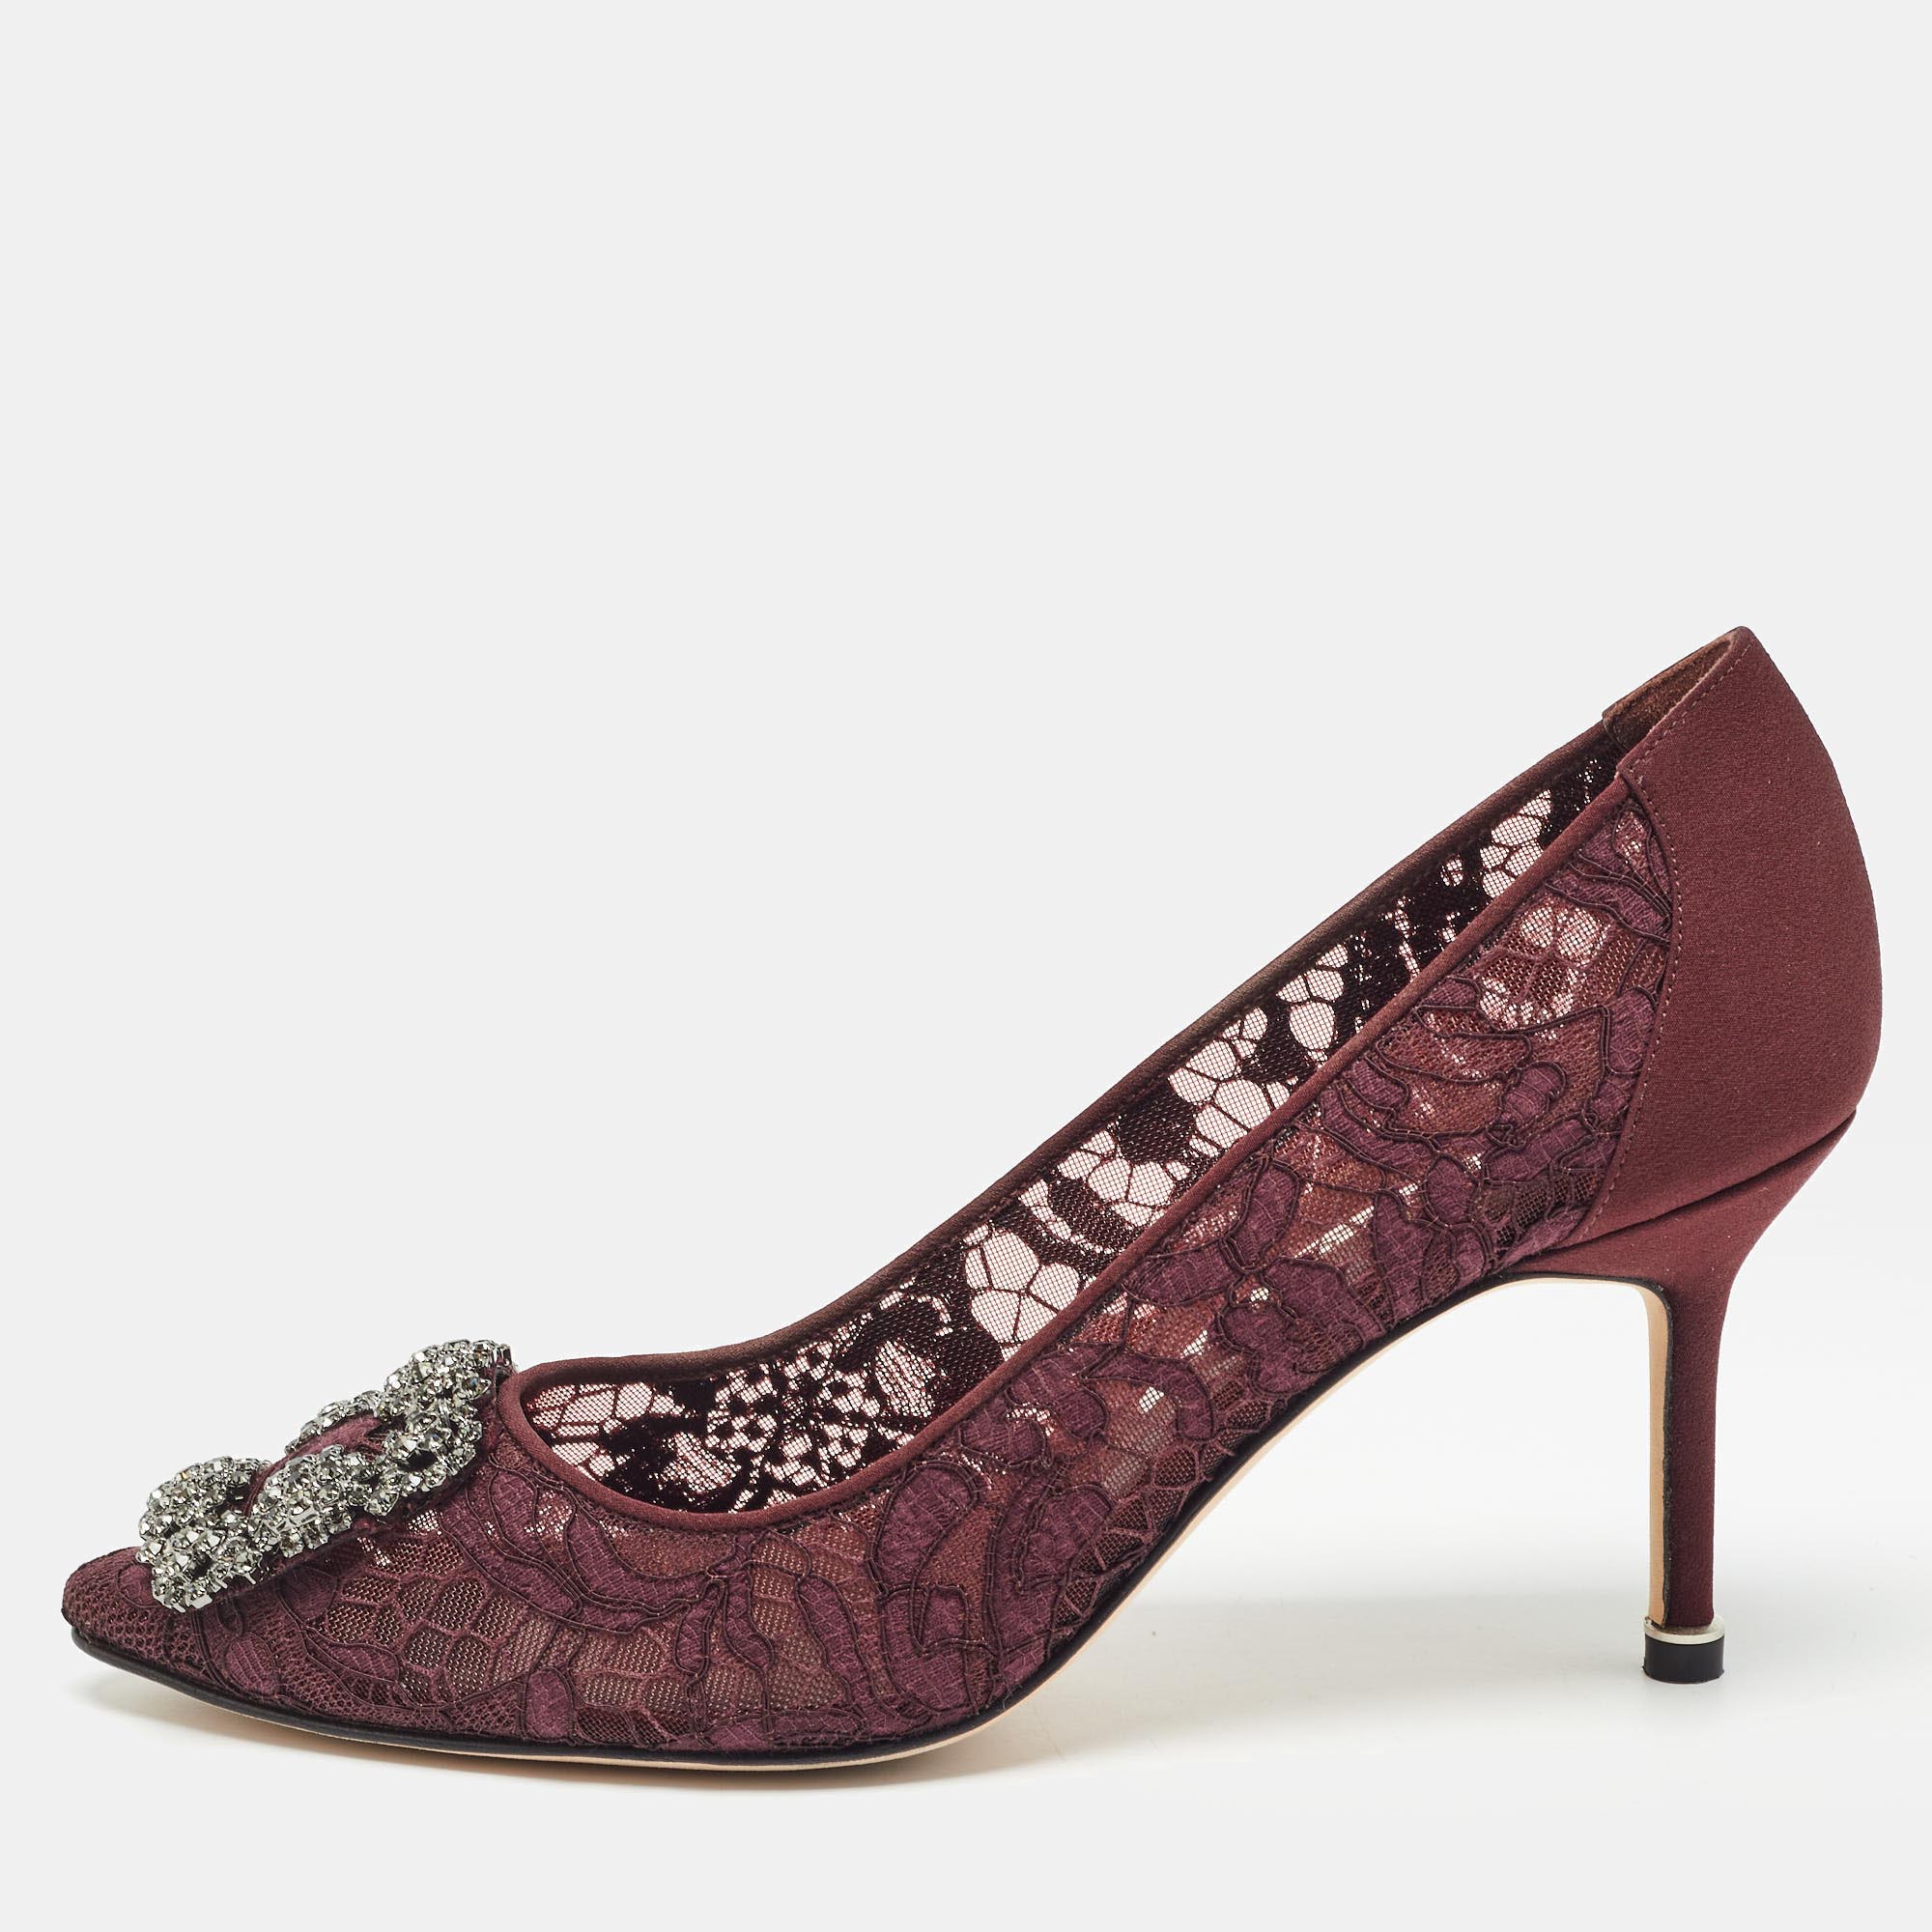 Manolo blahnik burgundy lace and mesh hangisi pumps size 38.5